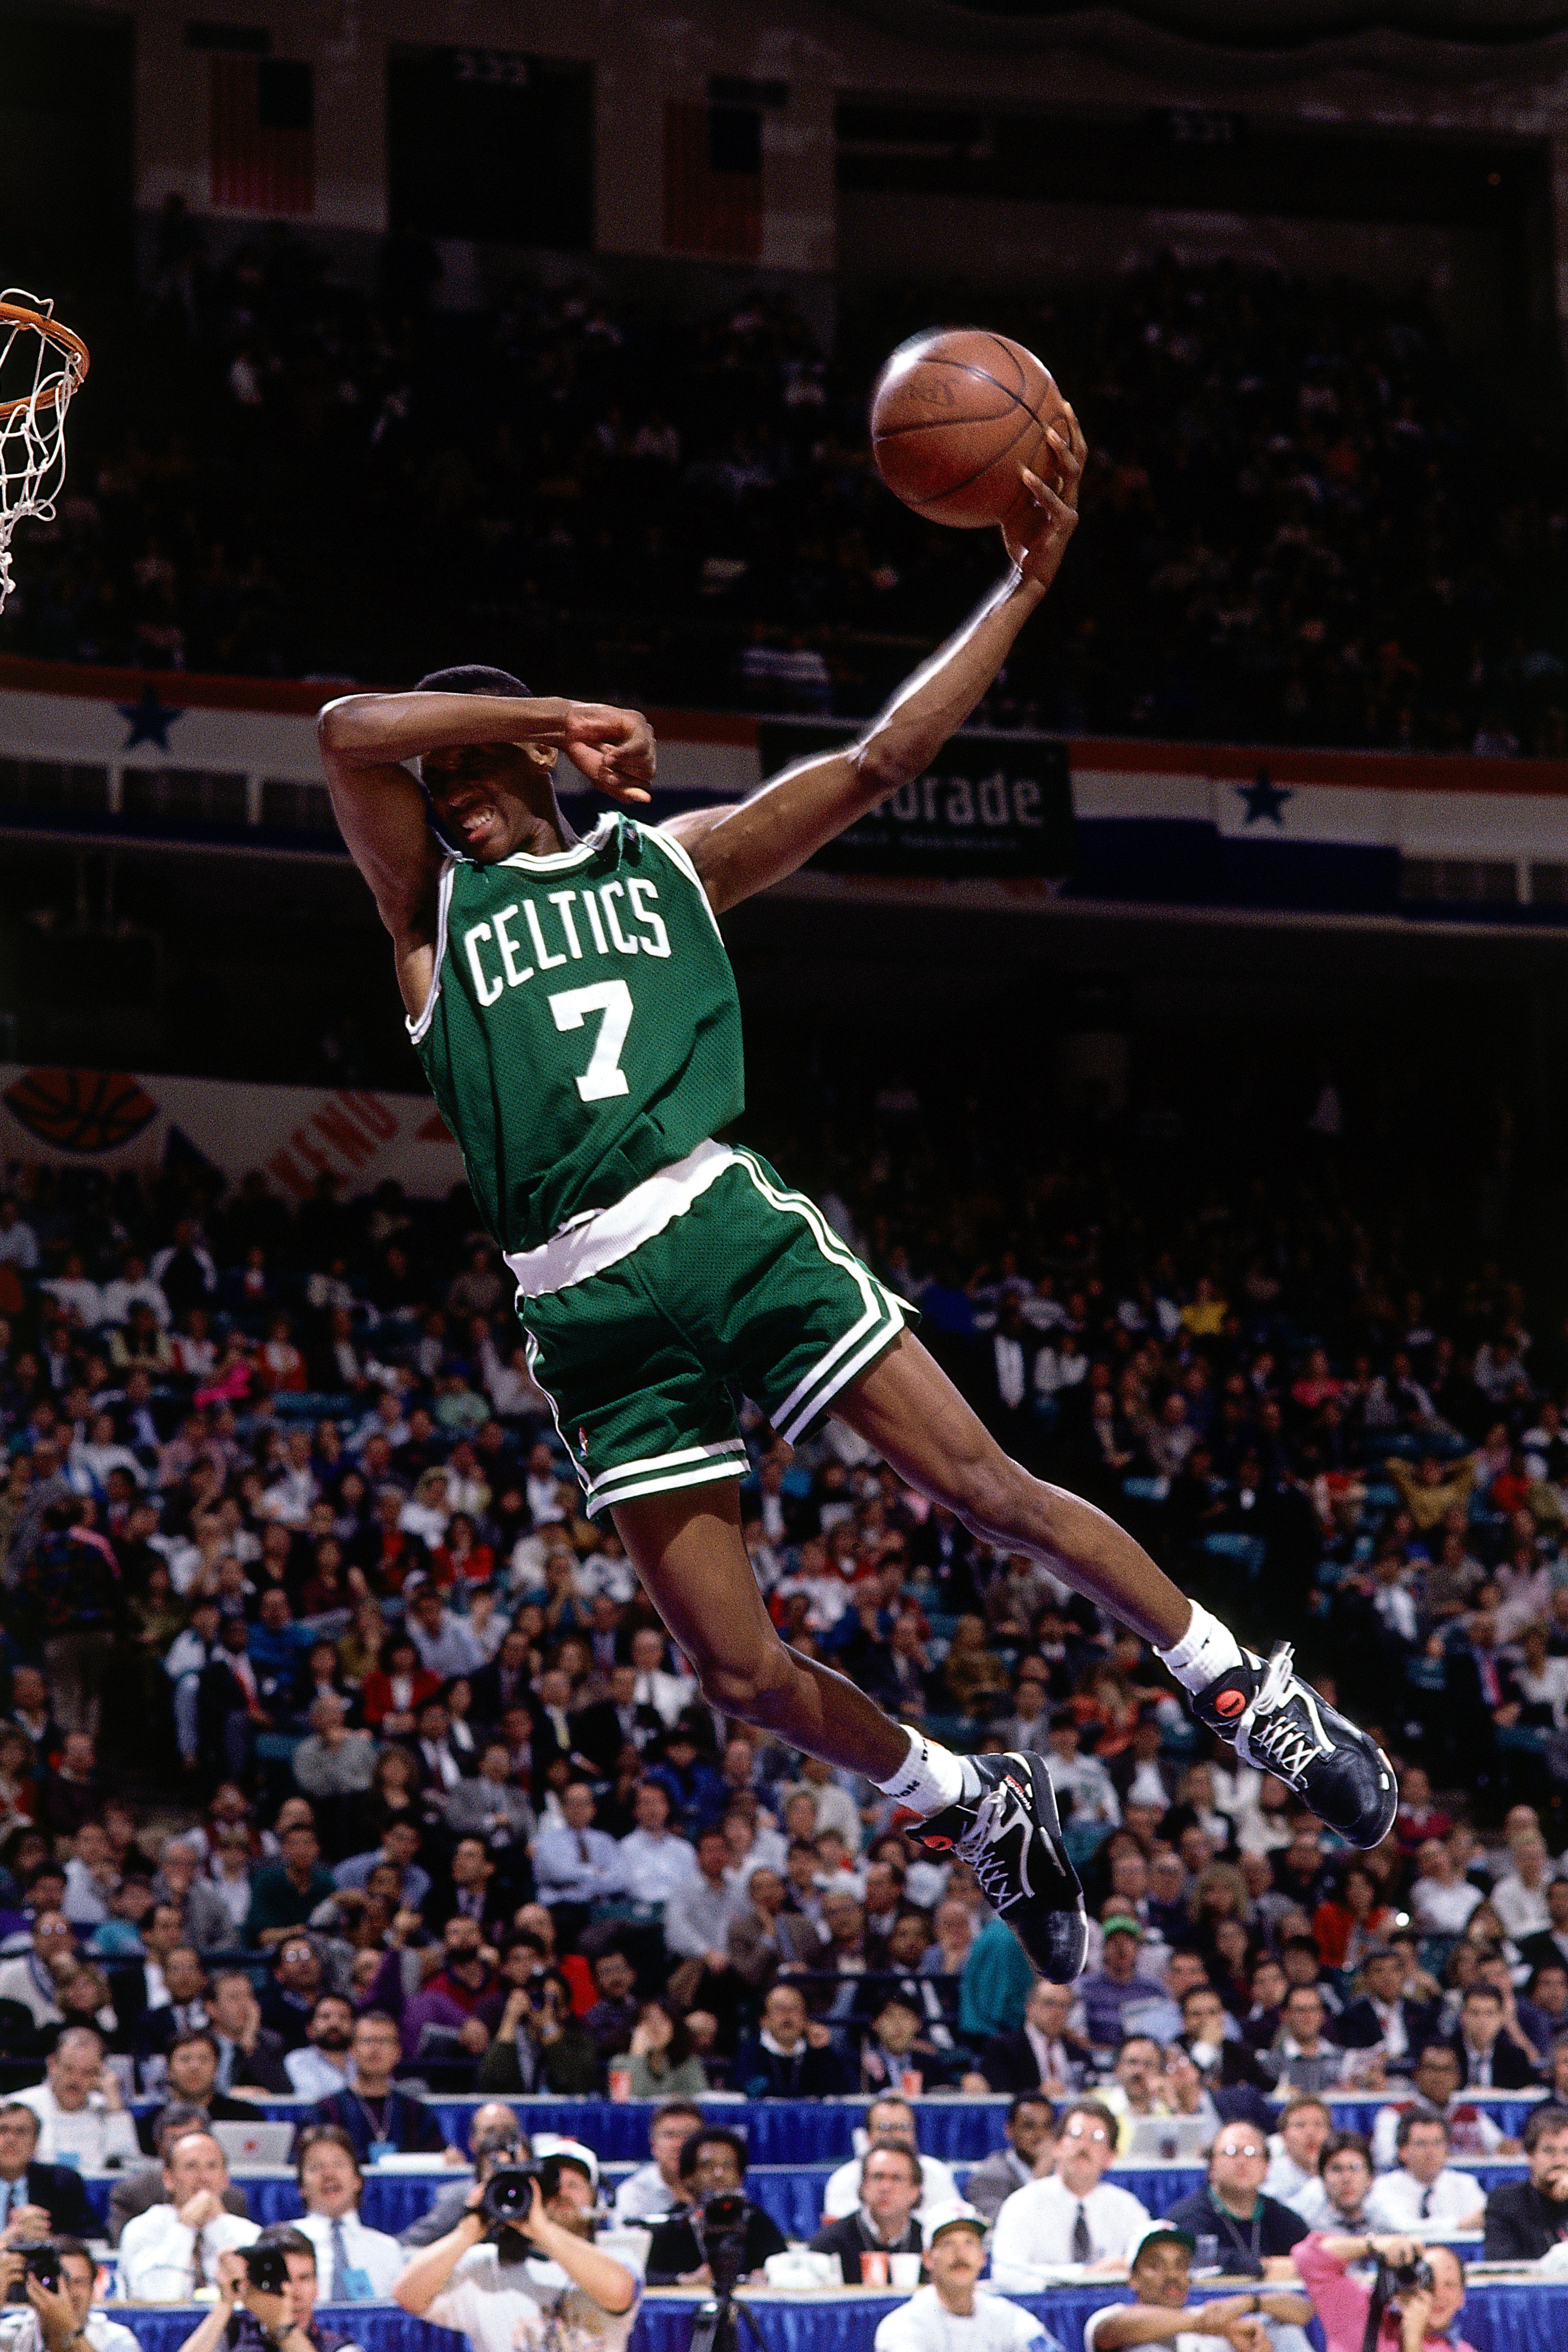 Dee Brown winning the 1991 NBA All-Star Slam Dunk Contest with his no-look dunk